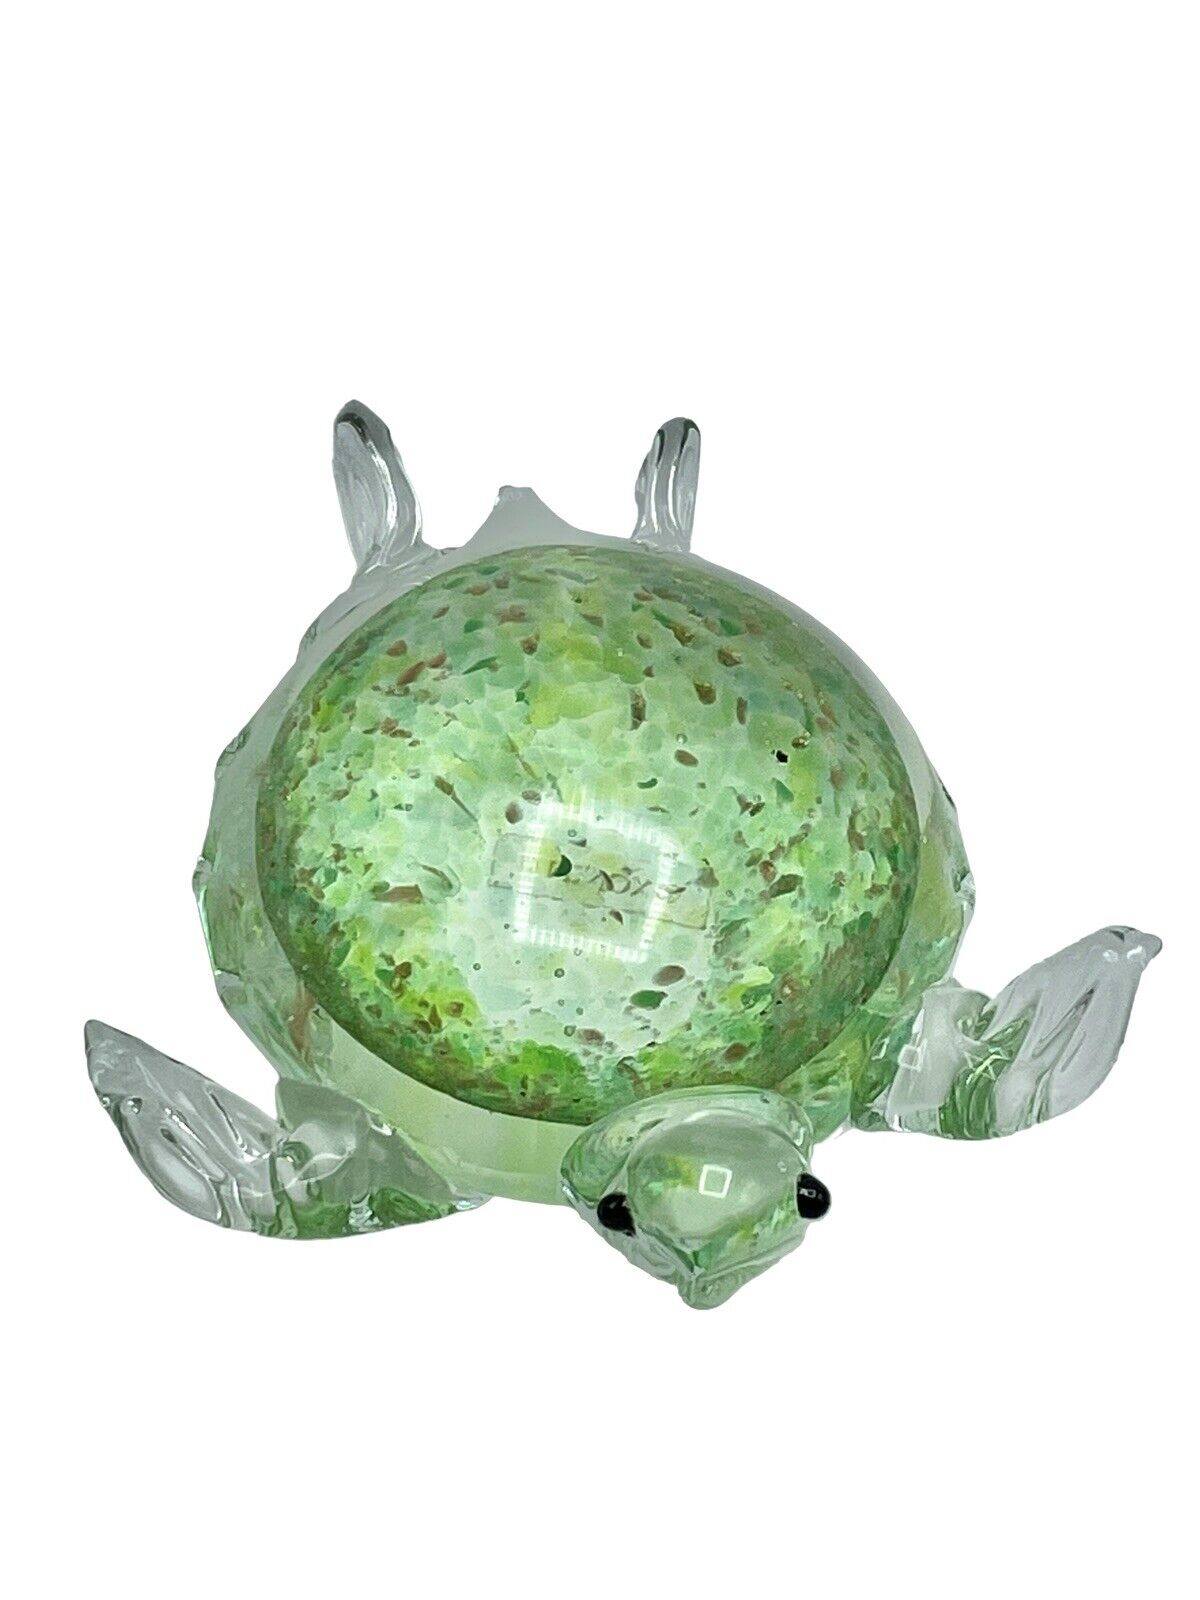 Lenox Art Glass Green Turtle with Gold Flecks Paperweight